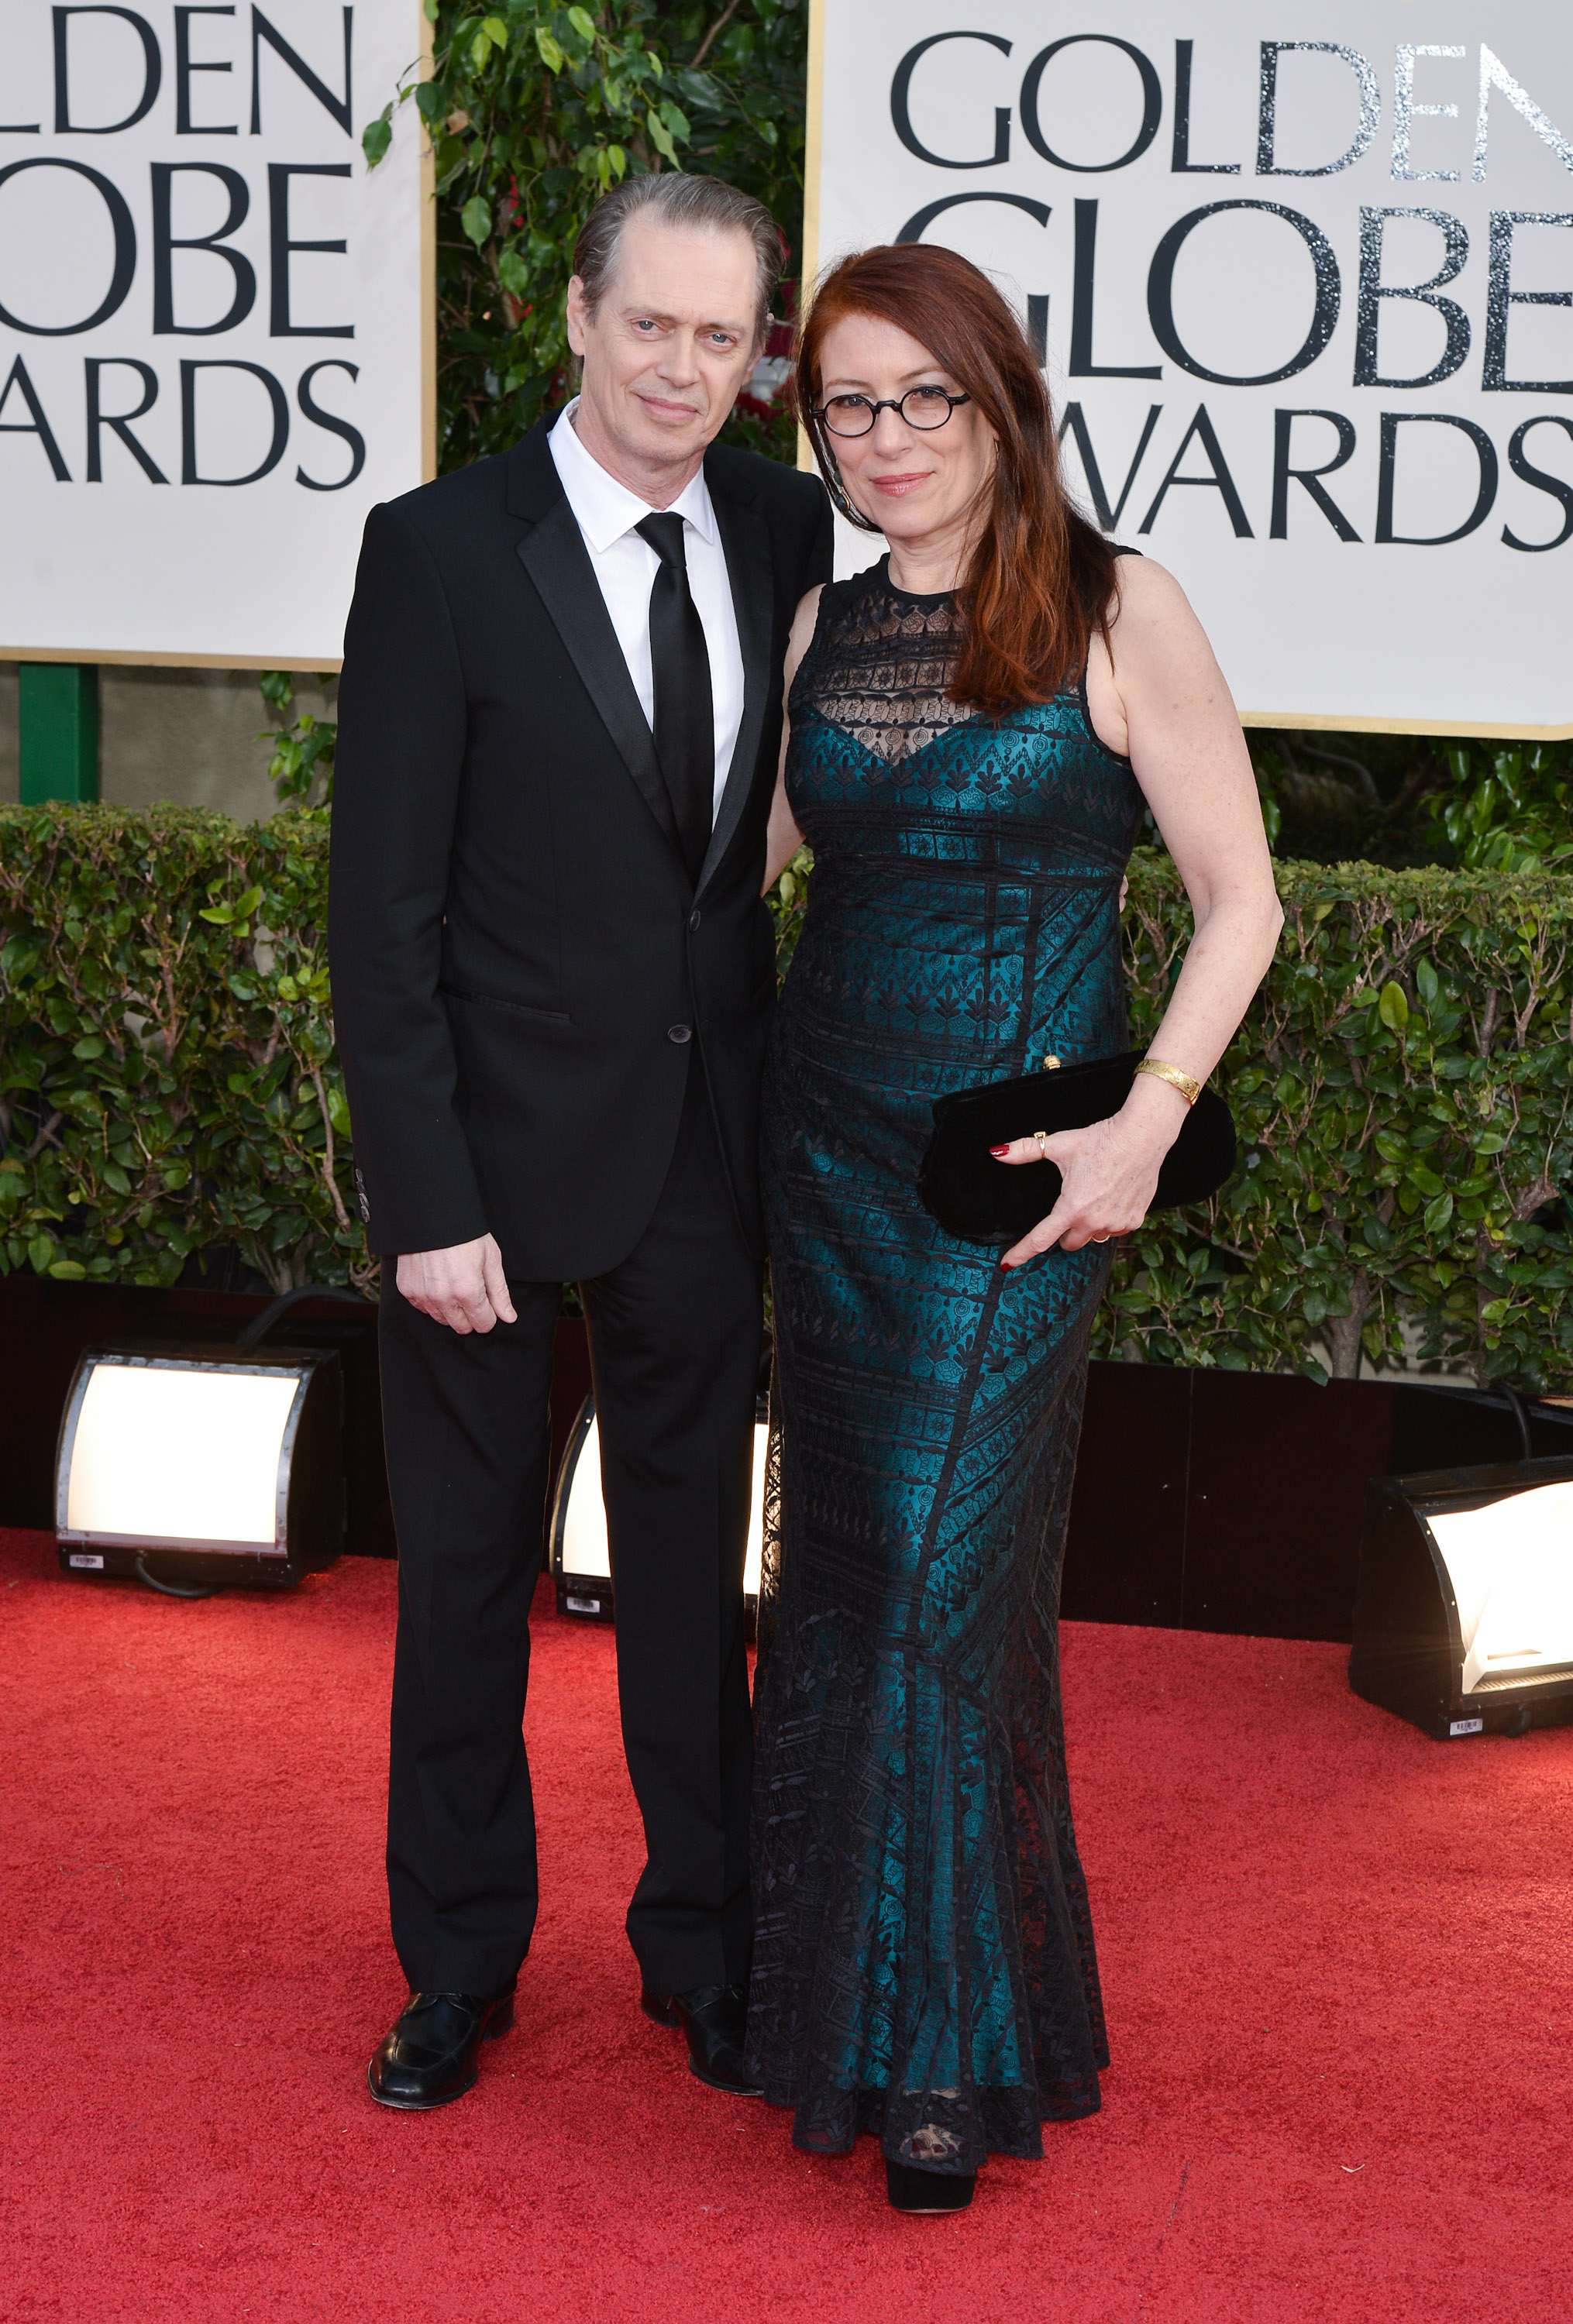 Actor Steve Buscemi and wife Jo Andres arrive at the 70th Annual Golden Globe Awards held at The Beverly Hilton Hotel on January 13, 2013 in Beverly Hills, California | Source: Getty Images